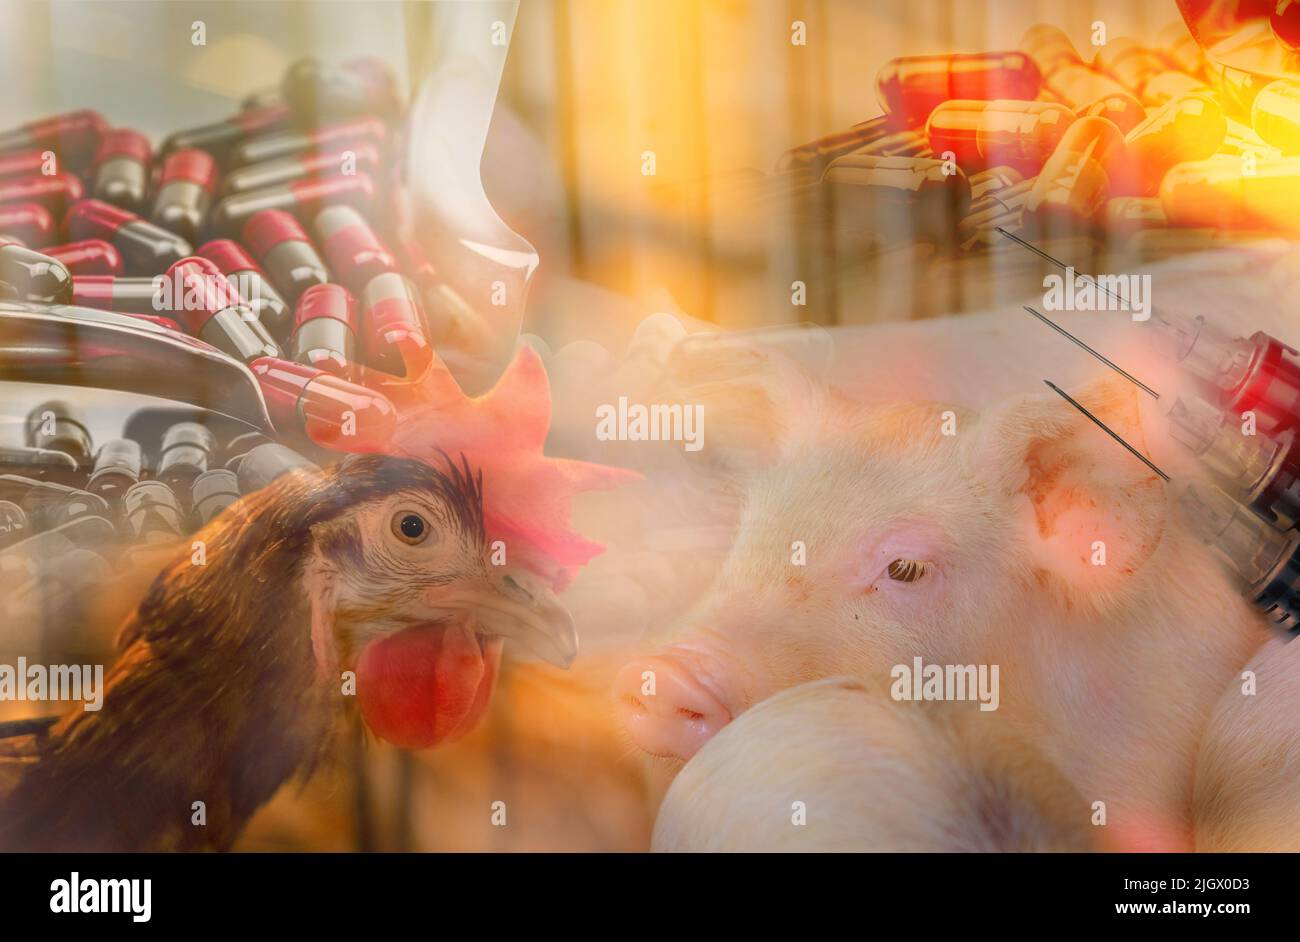 Chickens and pigs in livestock farms use antibiotics. Antibiotic drug resistance problem. Commercial poultry farming. Poultry and pork industry. Stock Photo